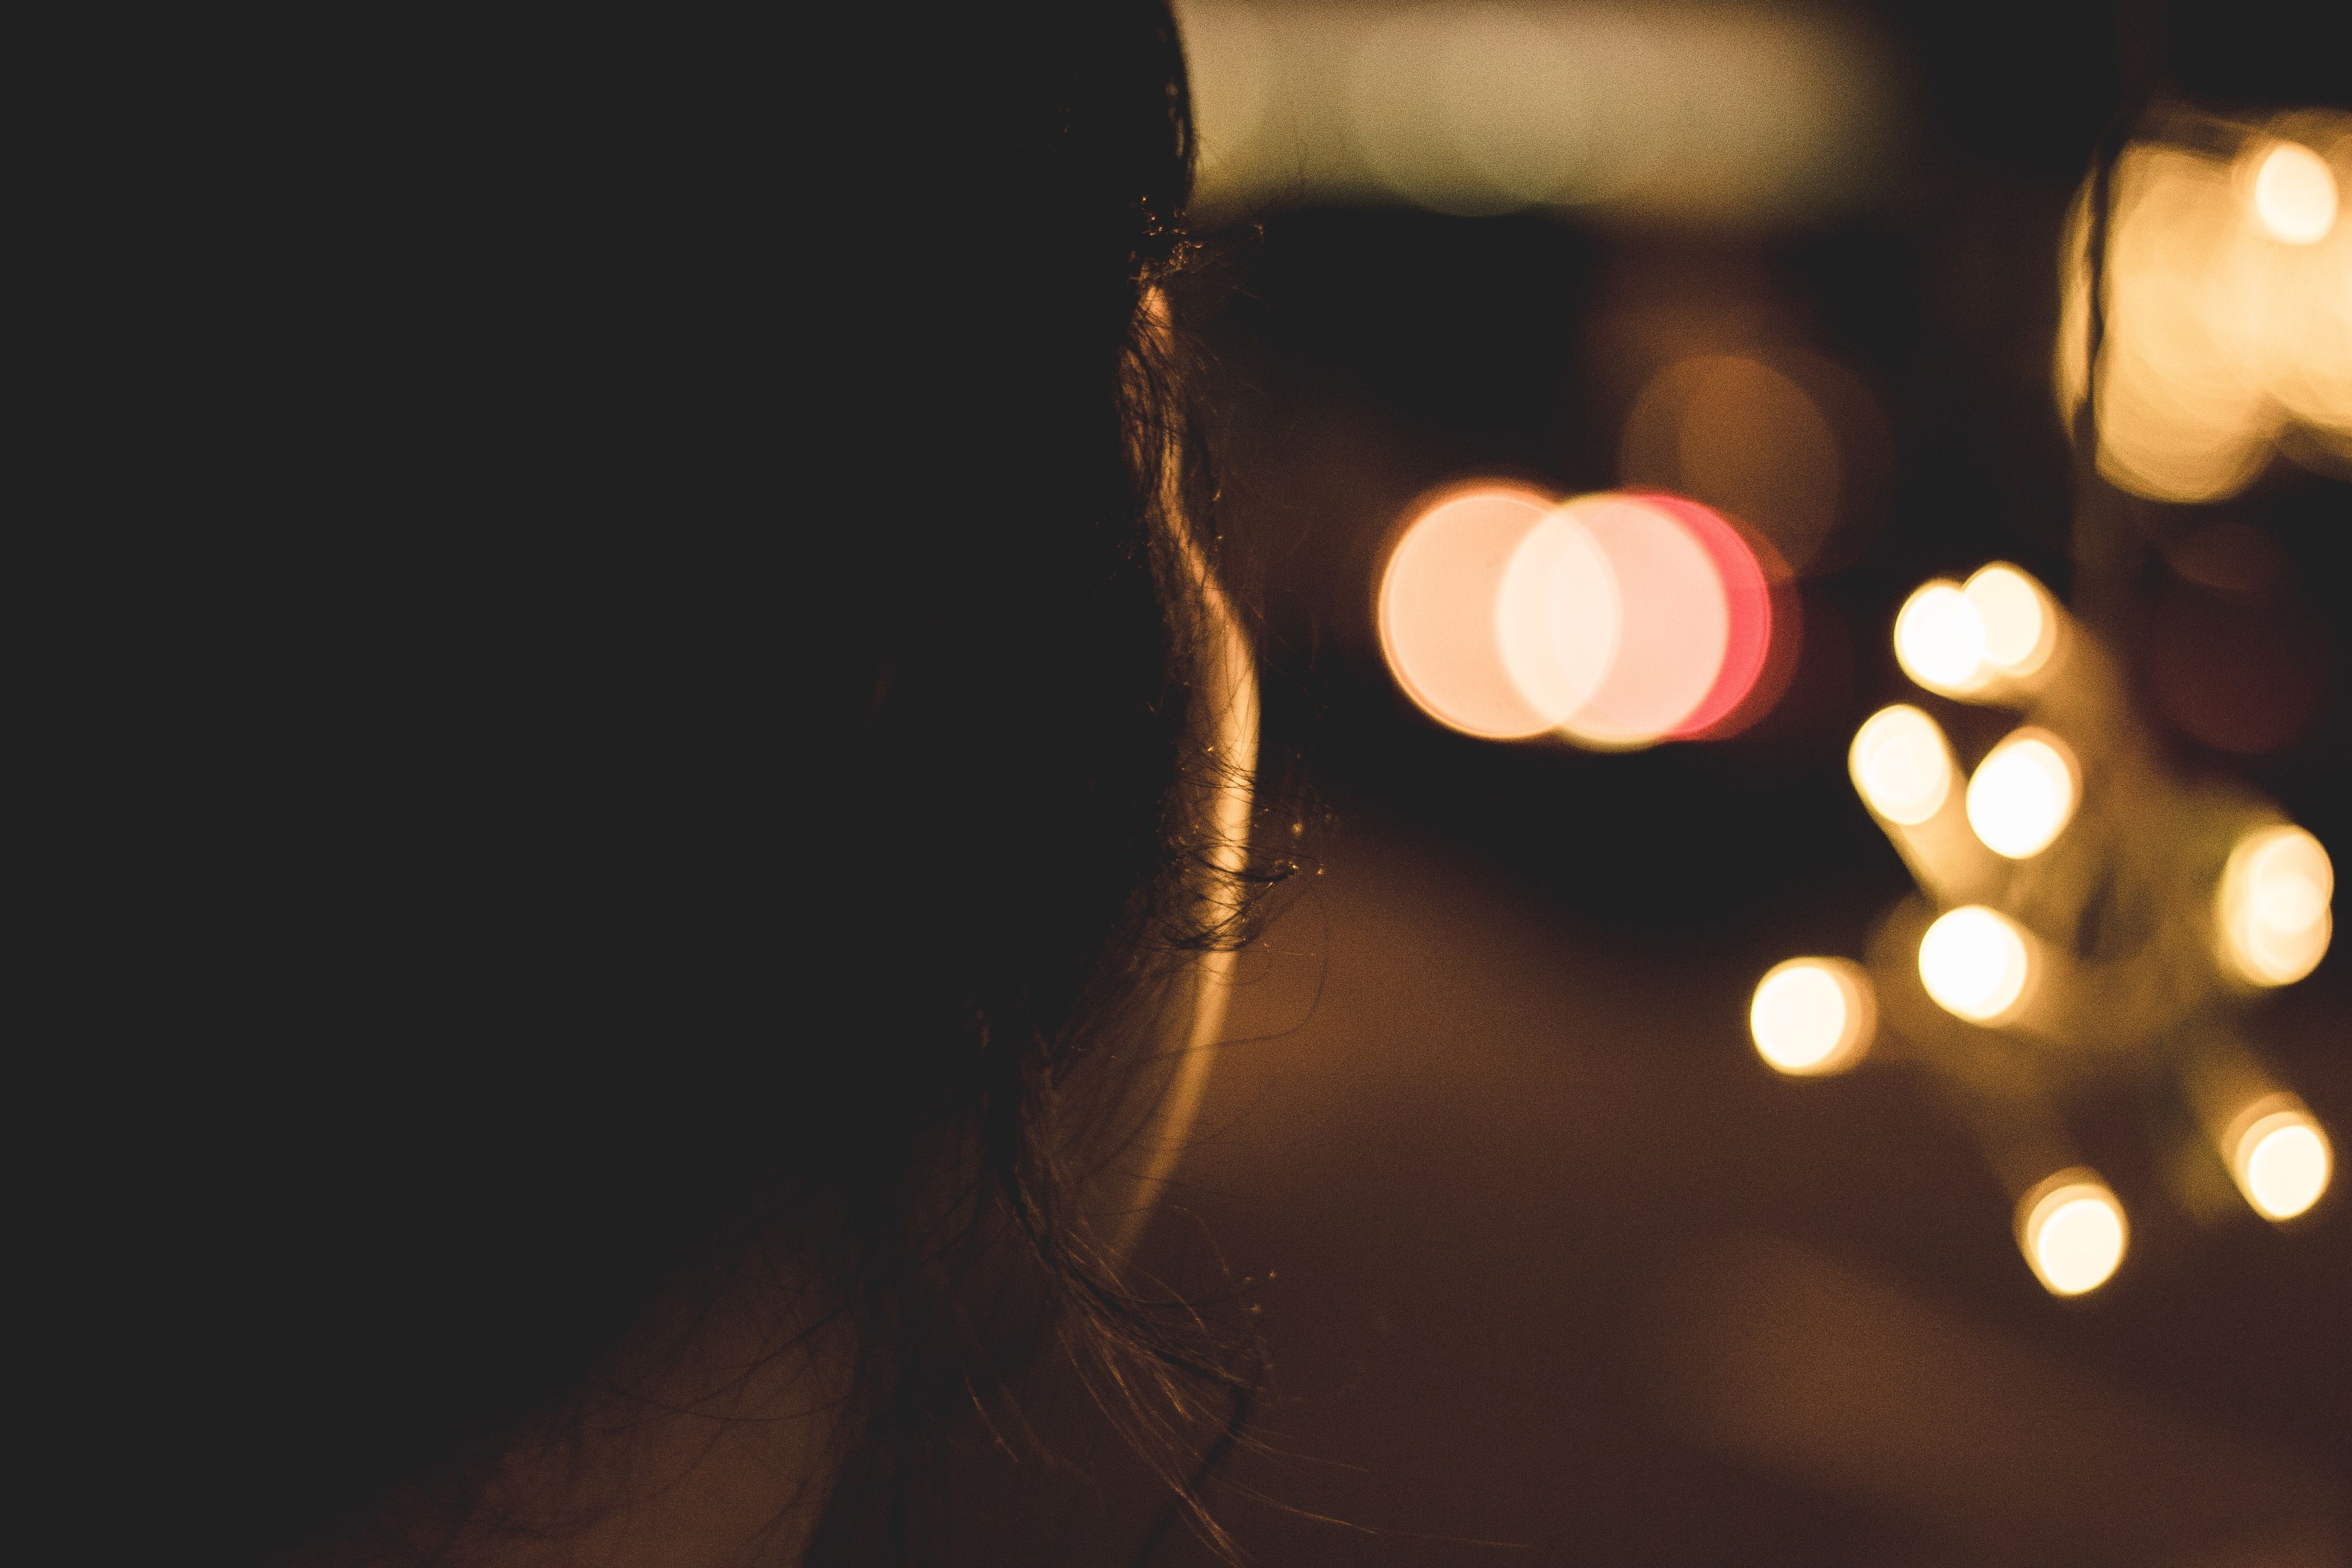 Photo of a person's face in silhouette looking at lights with a dark background